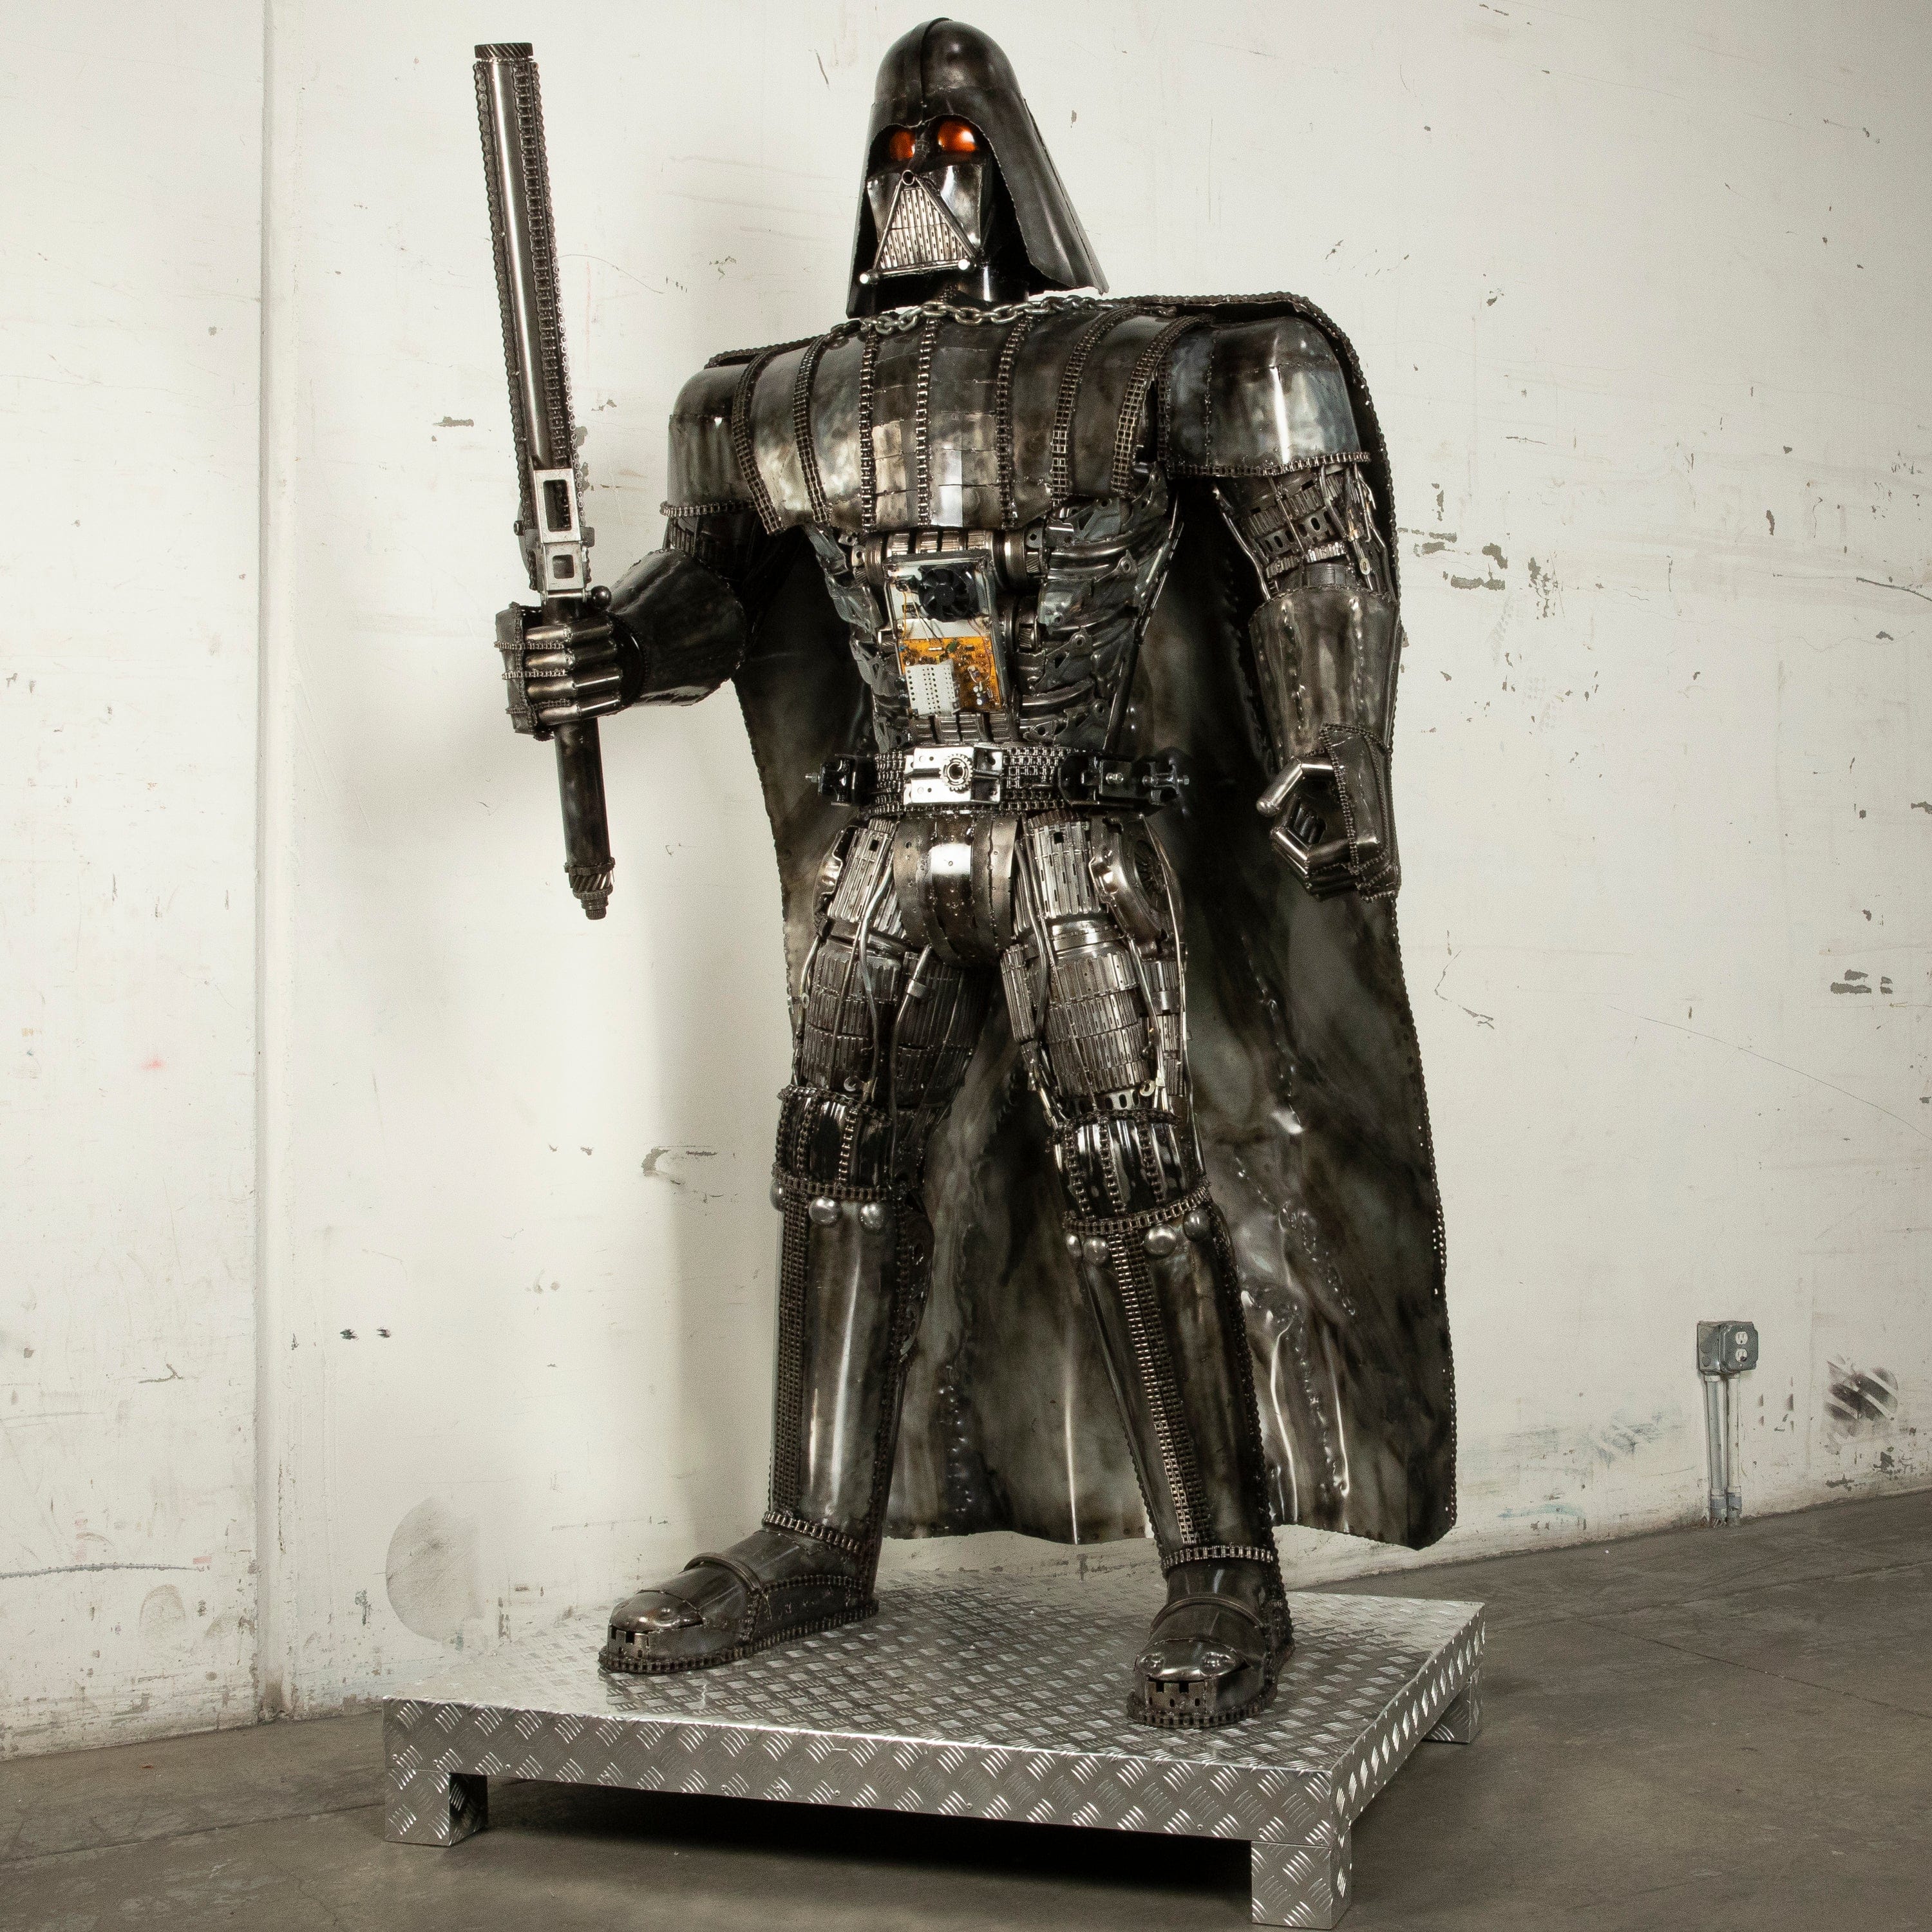 Kalifano Recycled Metal Art 91" Darth Vader Inspired Recycled Metal Art Sculpture RMS-DV230-S04